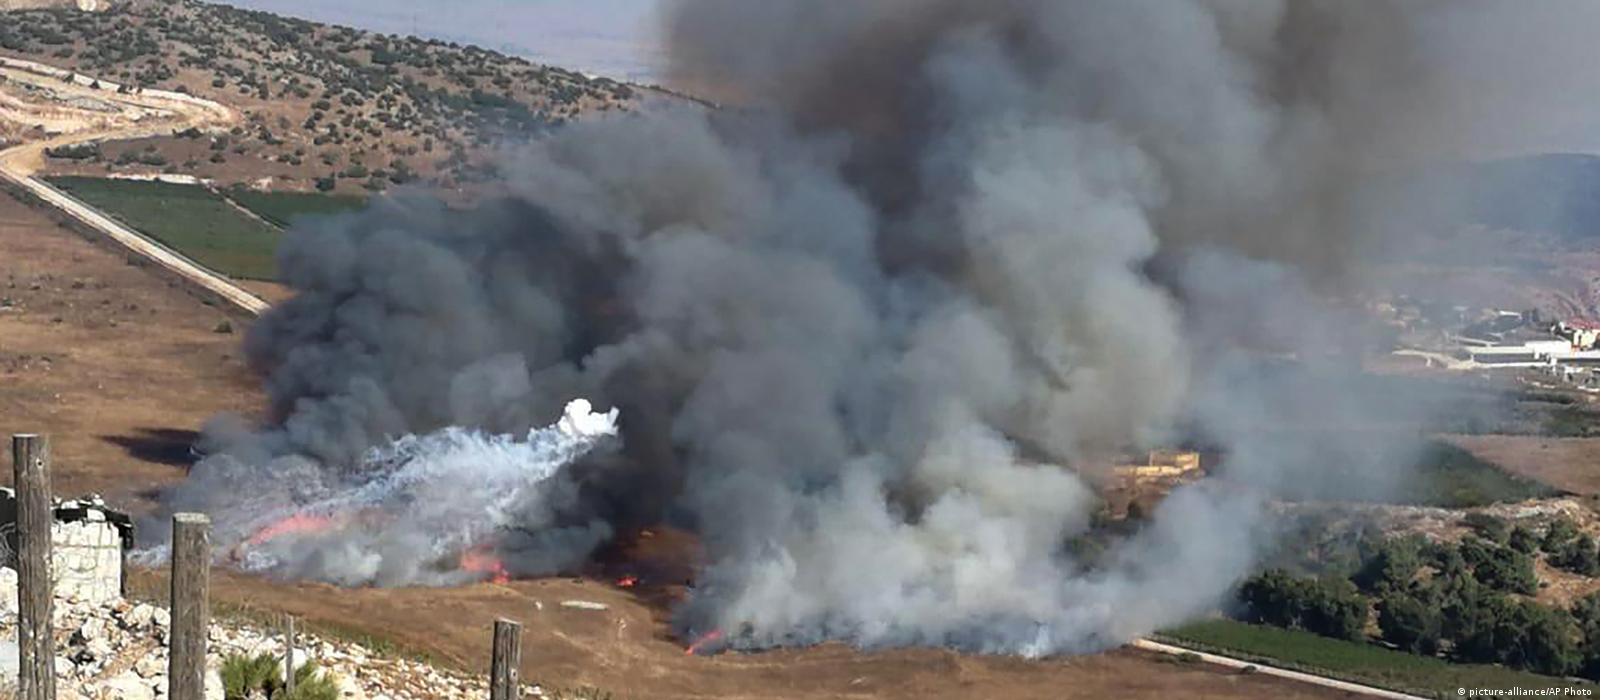 APLI PAC condemns missile attacks fired from Lebanon into Israel